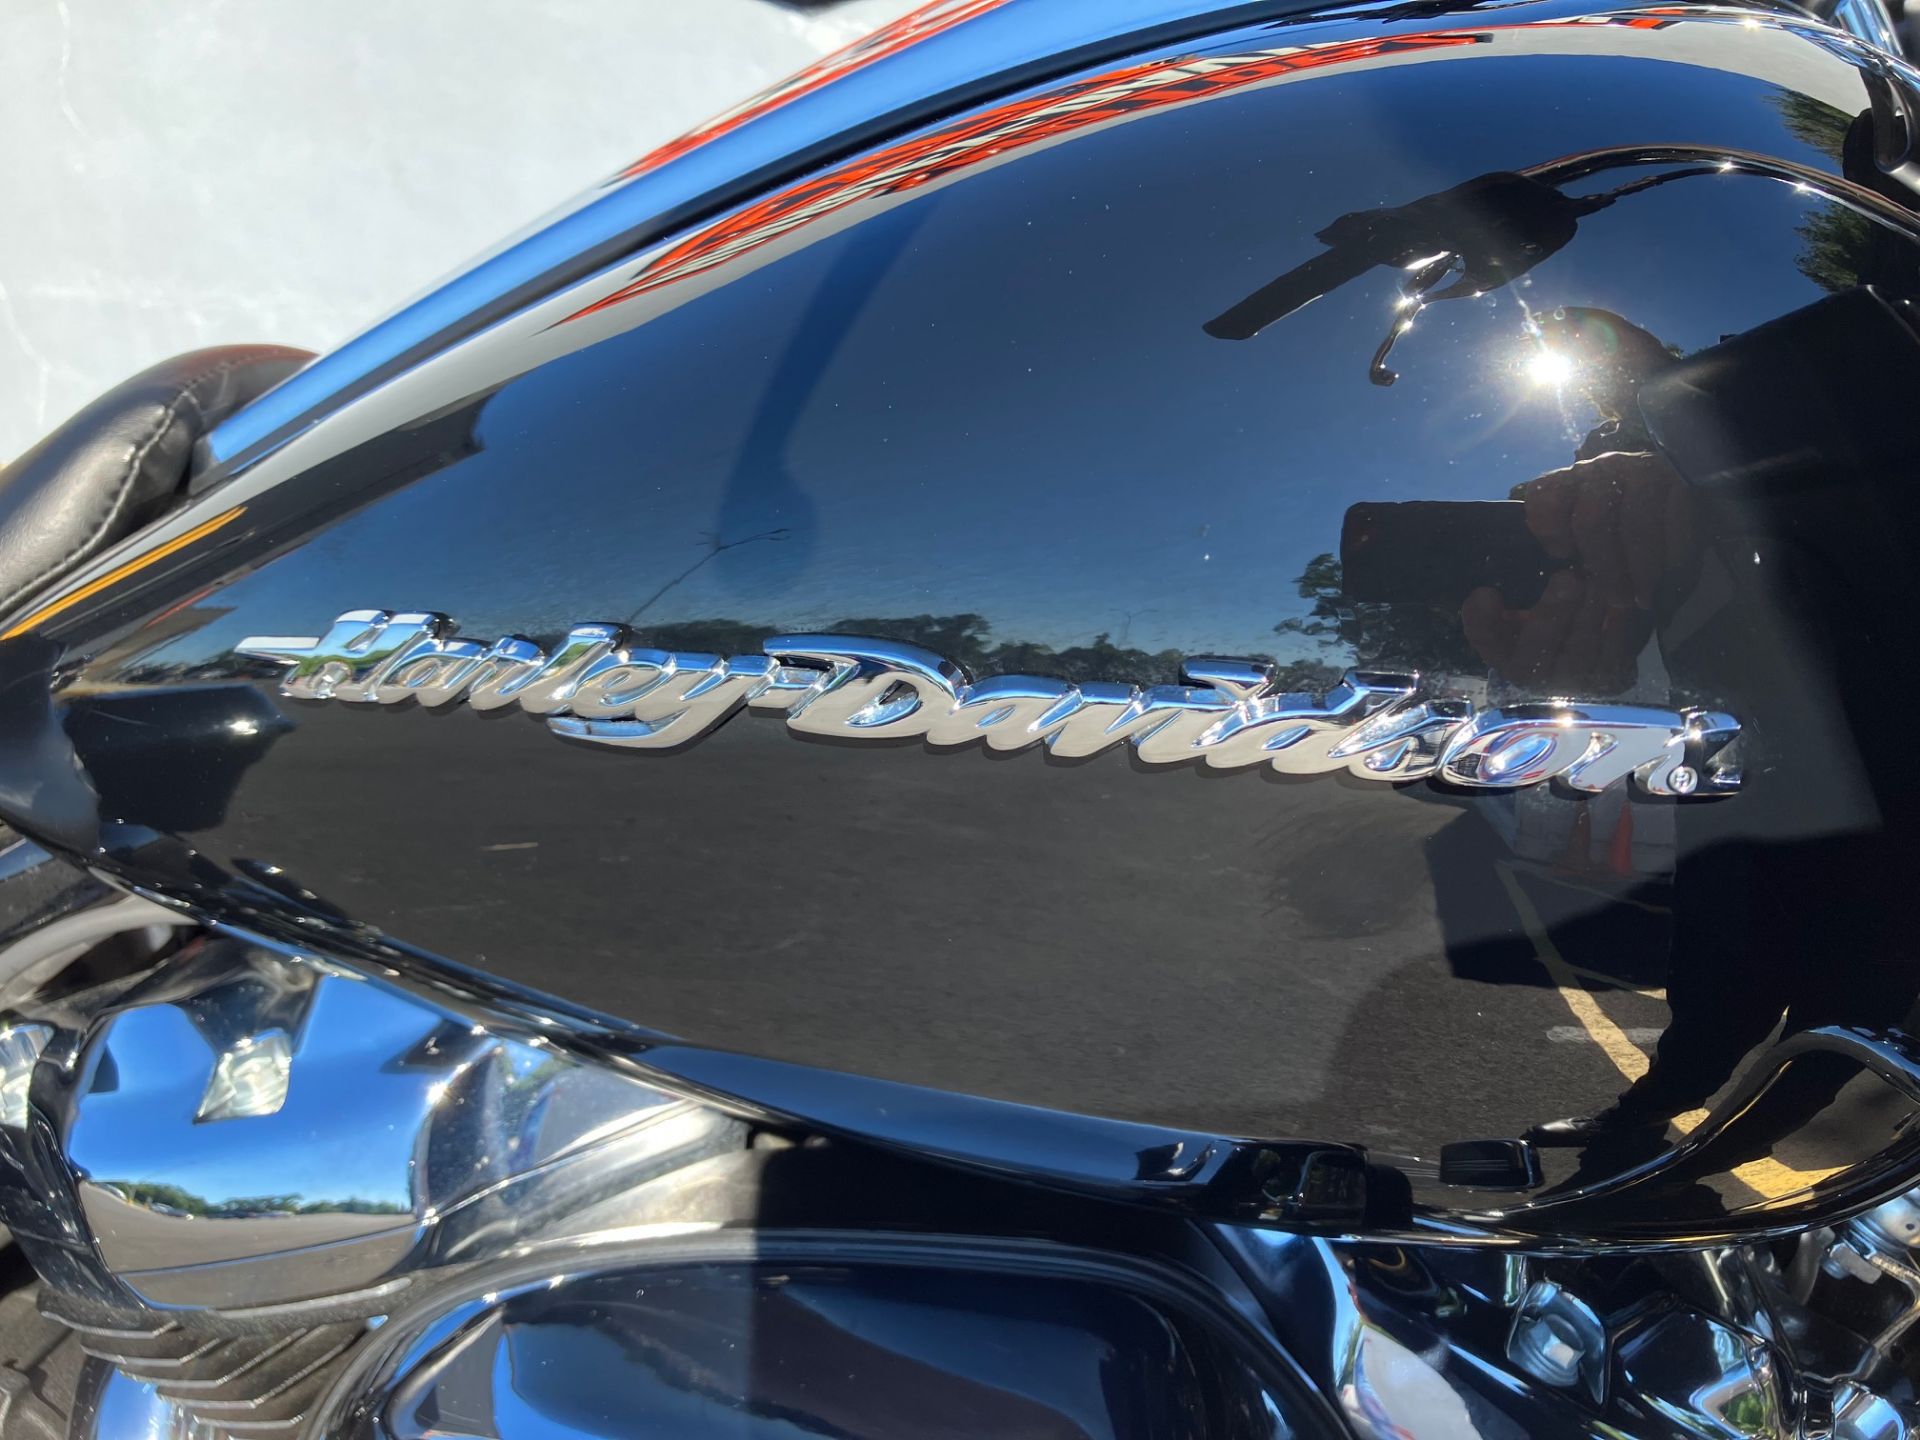 2020 Harley-Davidson ROAD GLIDE in West Long Branch, New Jersey - Photo 10